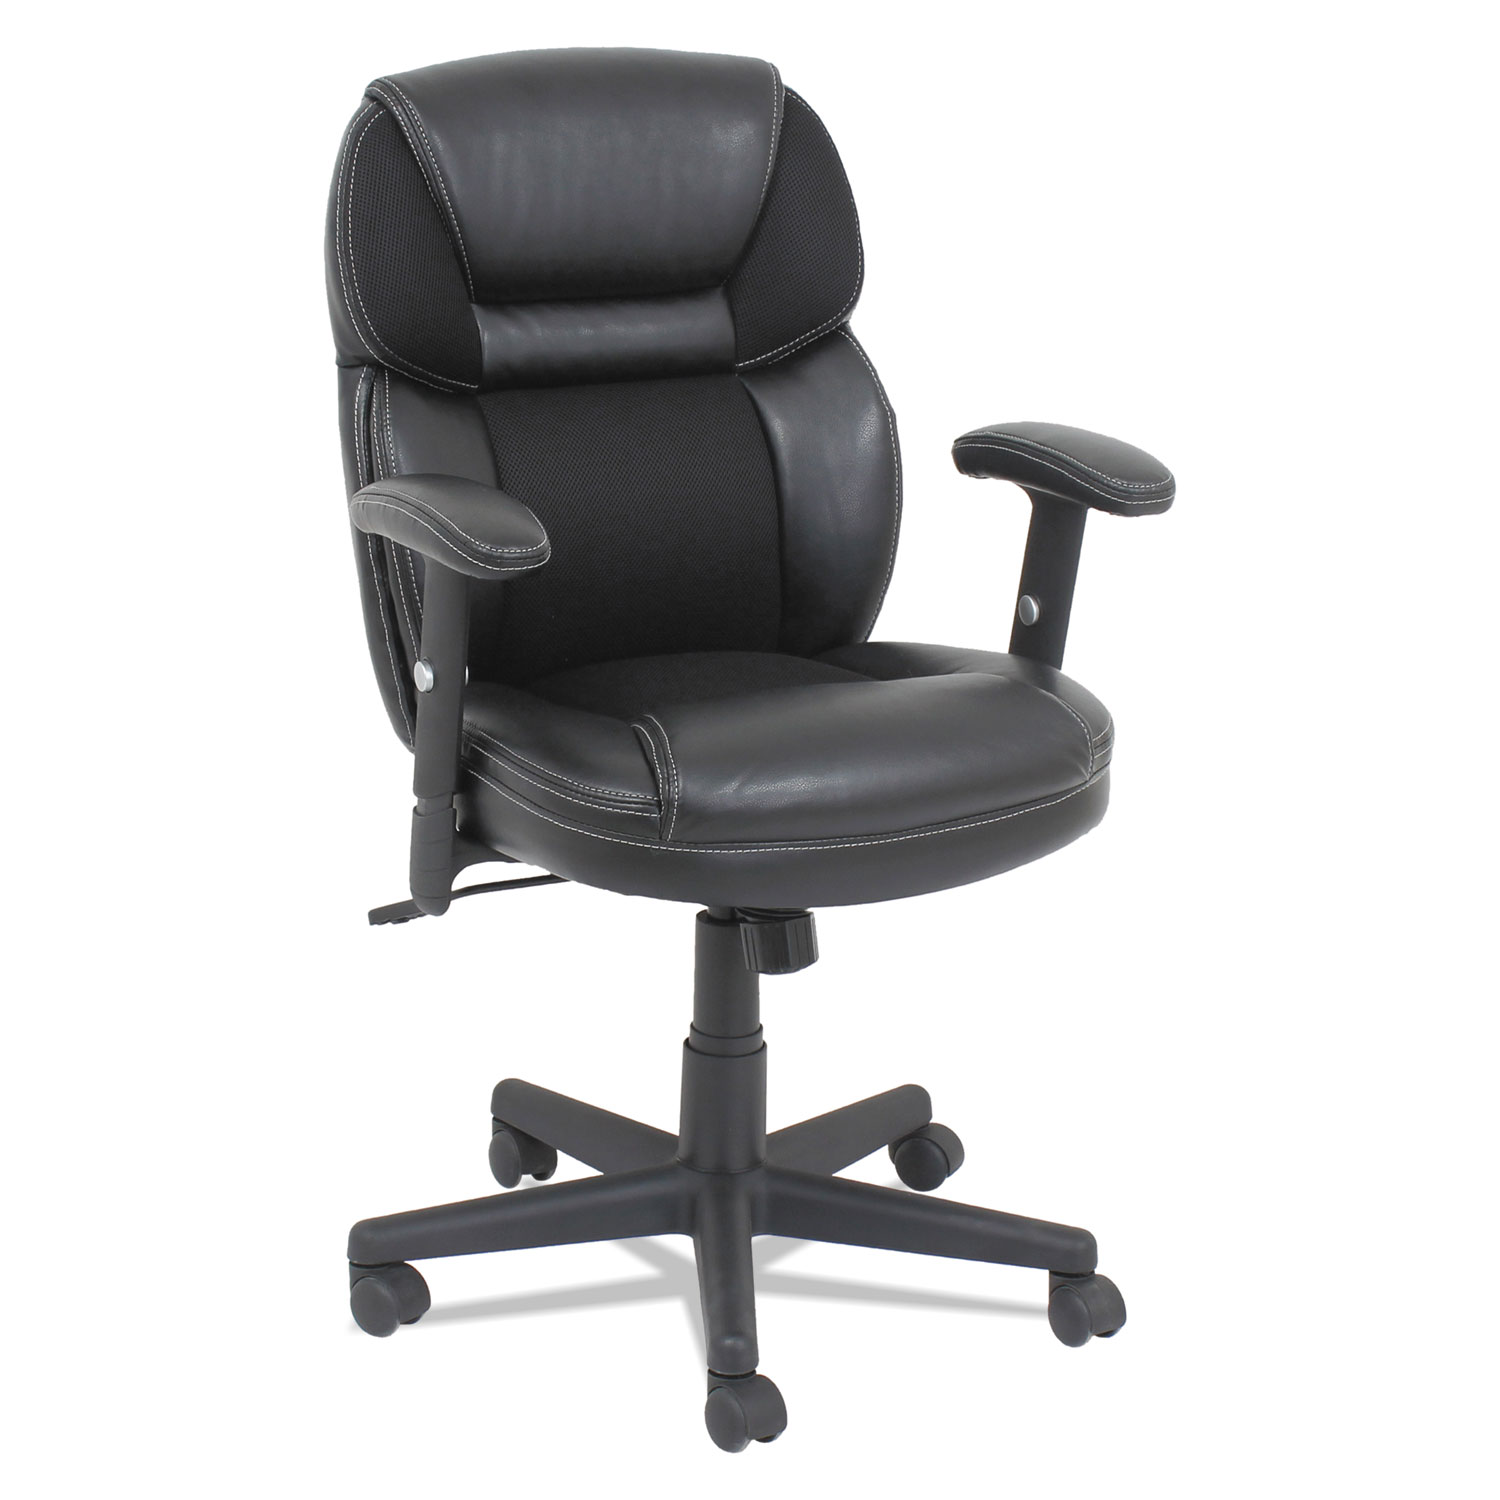  OIF OIFFL4213 Leather/Mesh Mid-Back Chair, Supports up to 250 lbs., Black Seat/Black Back, Black Base (OIFFL4213) 